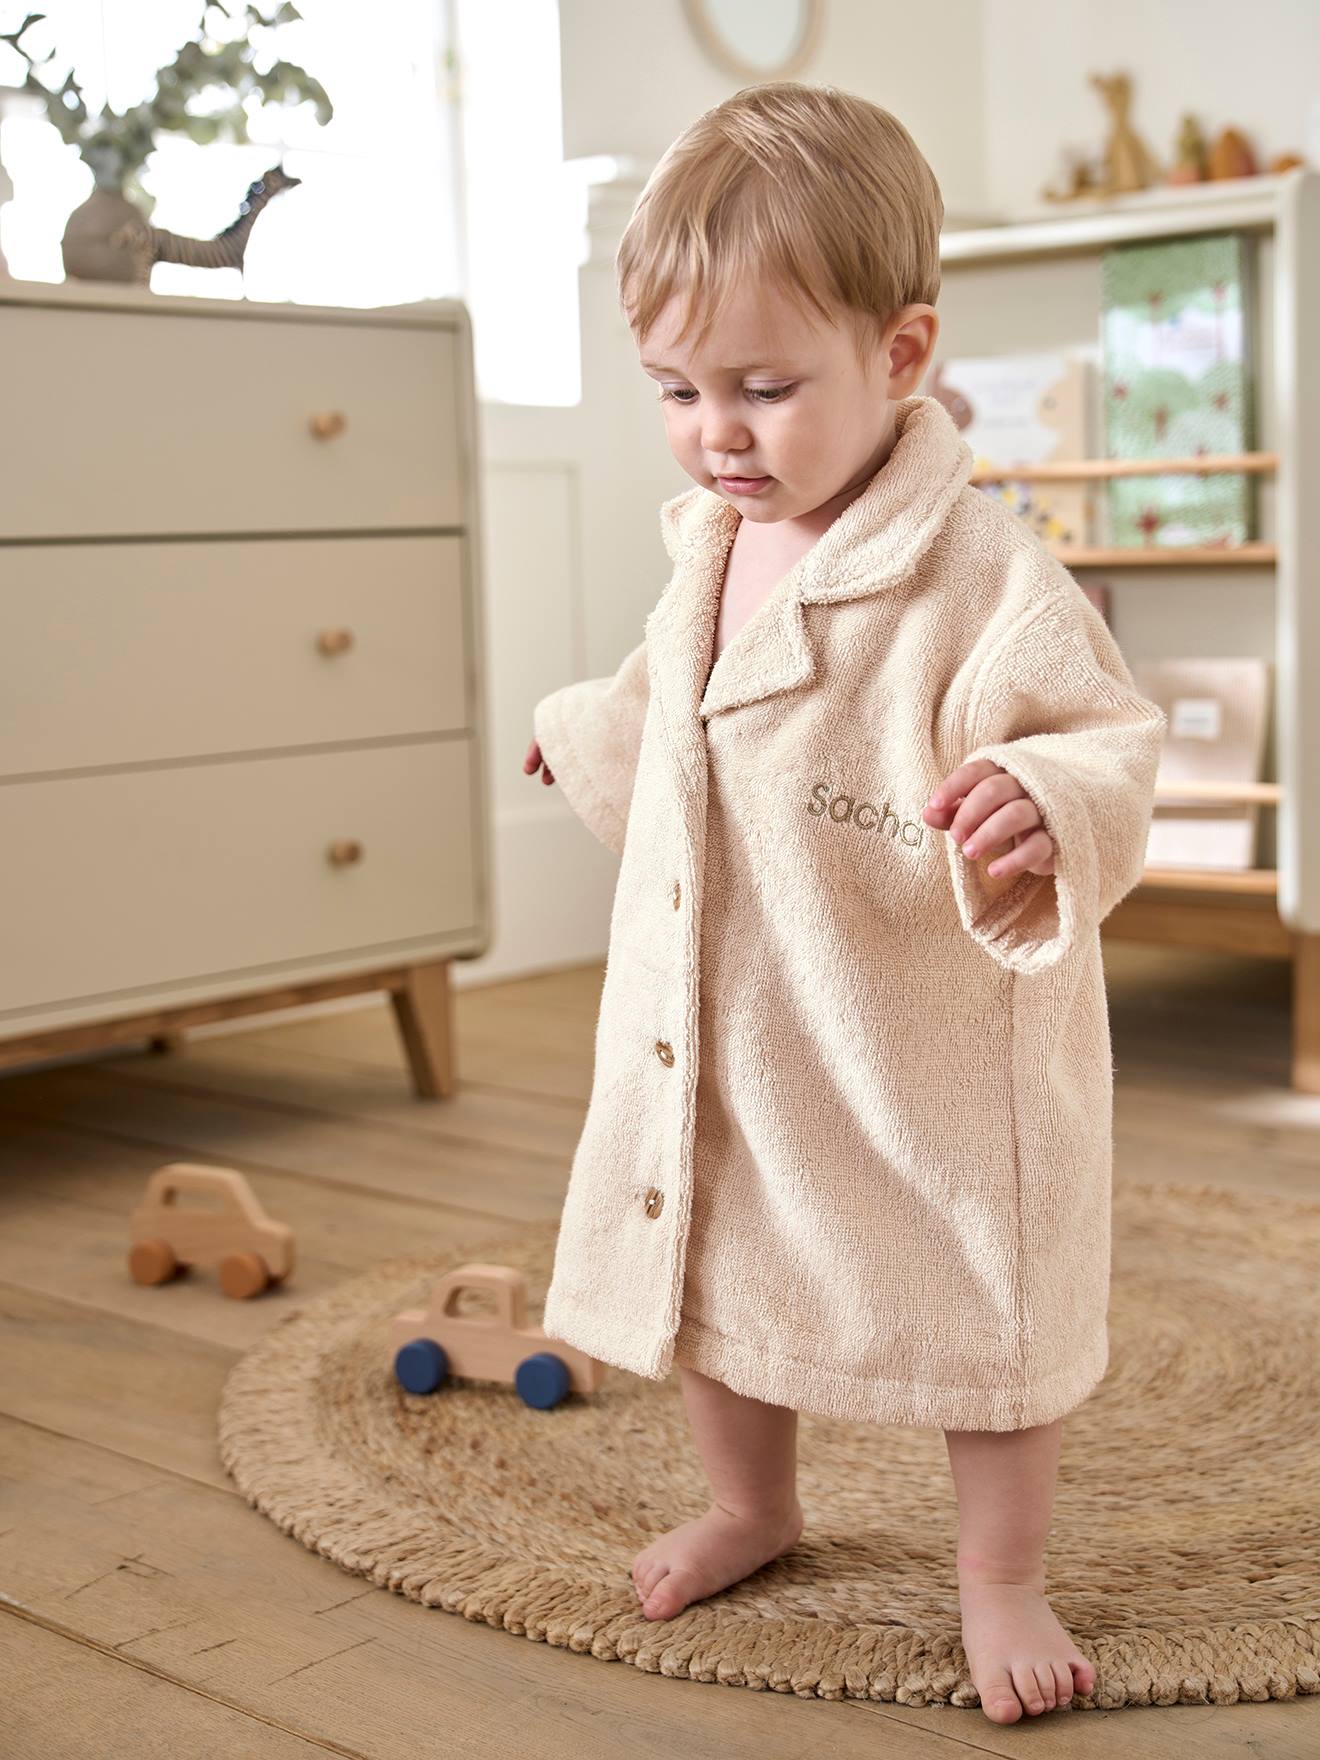 Deluxe Toddler Bathrobes - Initial-Impressions